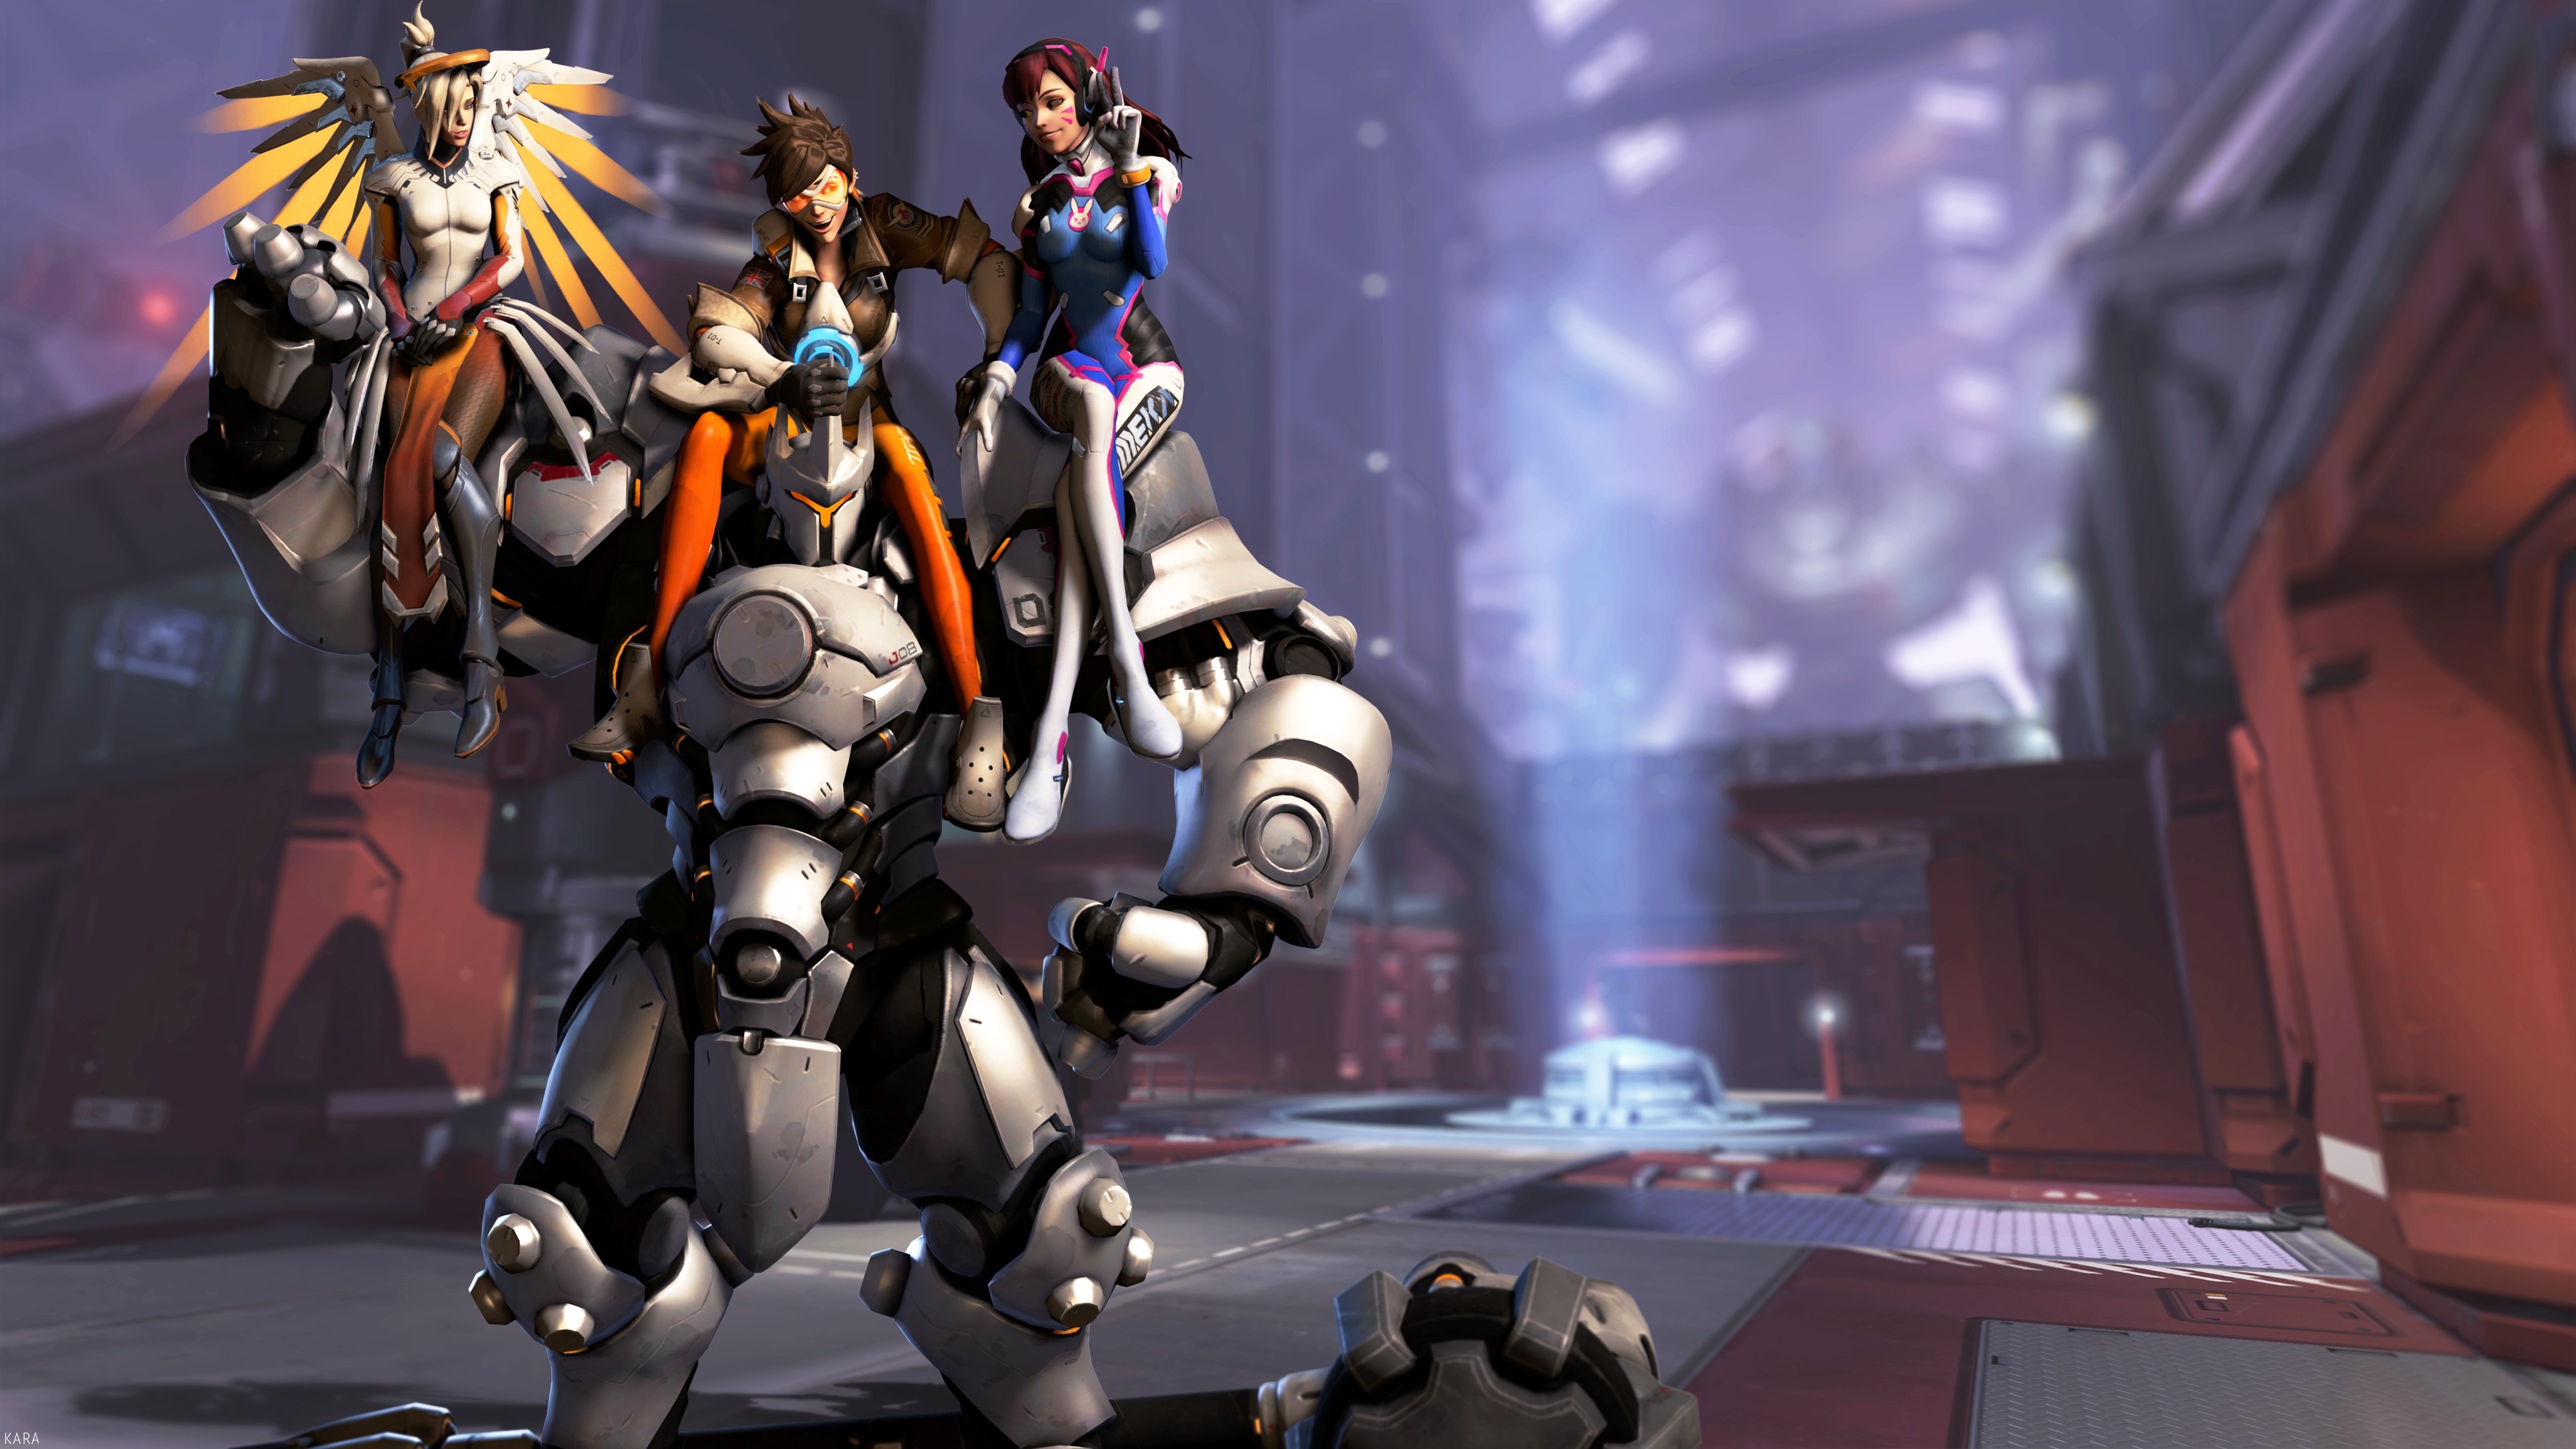 General 4000x2250 Overwatch Blizzard Entertainment Mercy (Overwatch) Tracer (Overwatch) D.Va (Overwatch) Reinhardt (Overwatch) Reinhardt Wilhelm video game characters video games PC gaming video game girls